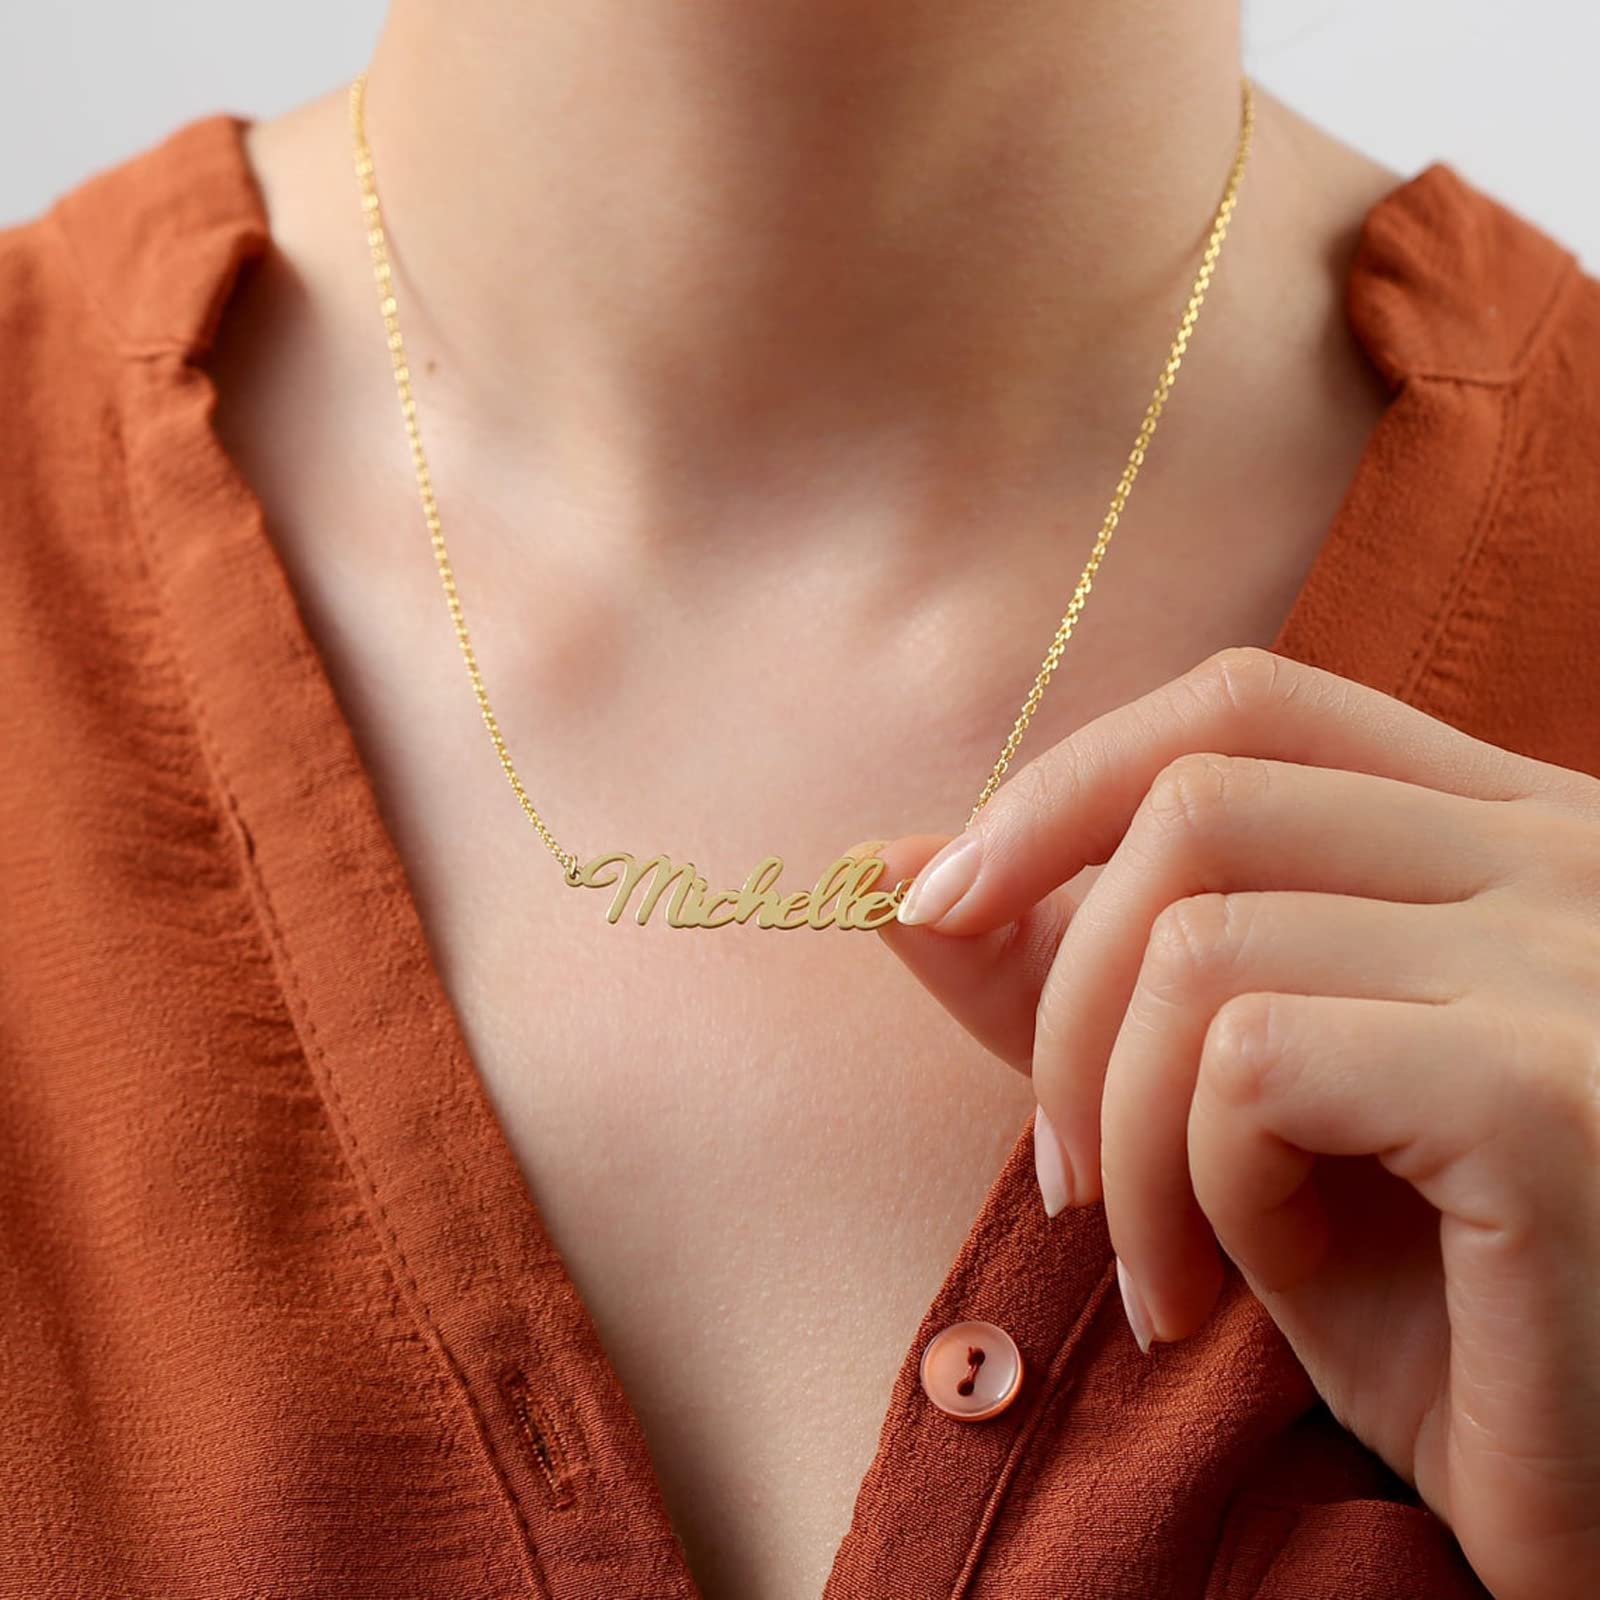 Custom Name Necklace Personalized Name Necklace 18K Gold Plated Jewelry Gift for Women